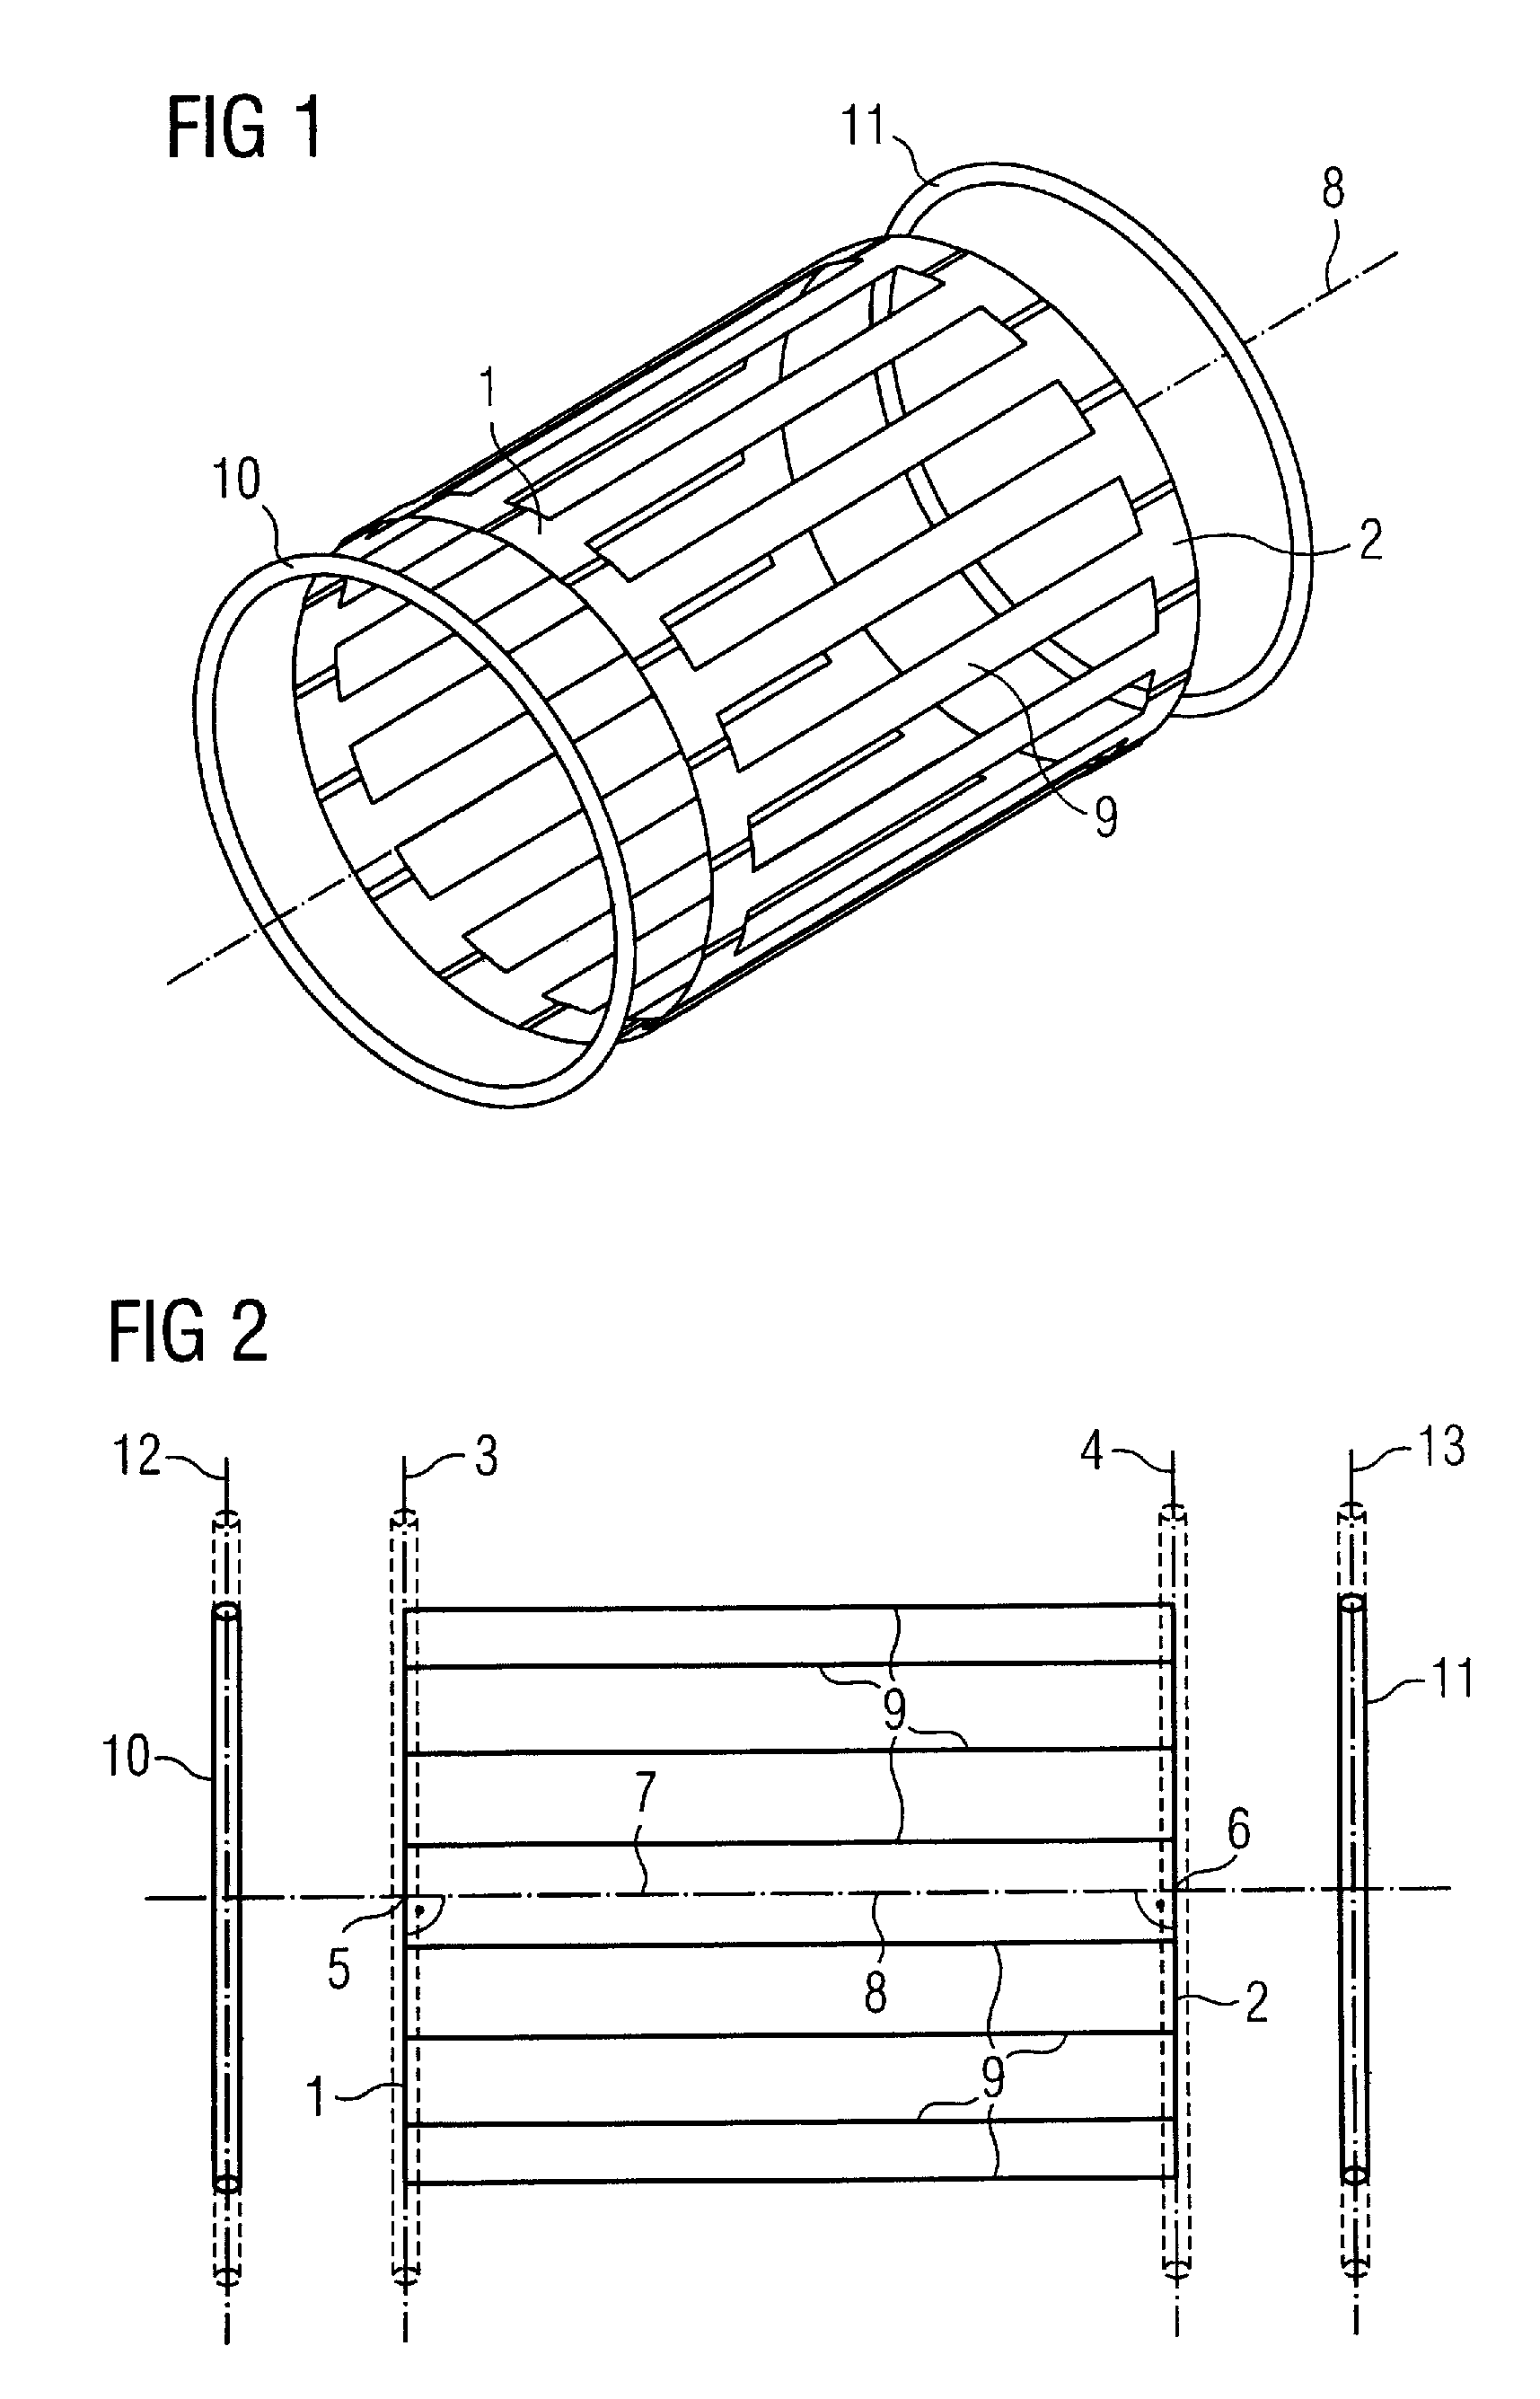 Birdcage resonator with coupling rings in addition to the ferrules